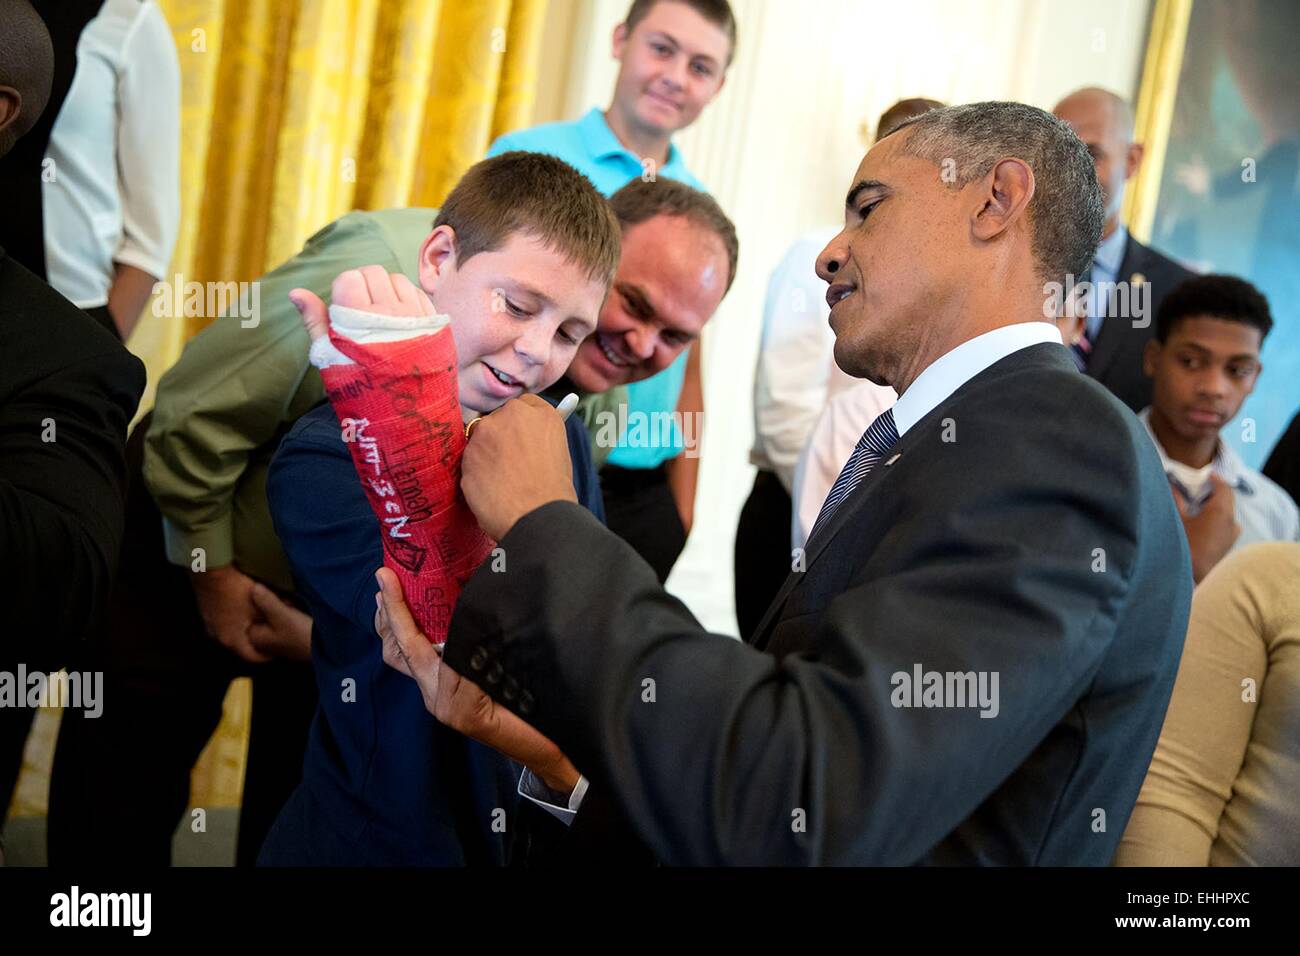 US President Barack Obama signs a boy's cast as he visits with wounded warriors and their families in the East Room during a tour of the White House September 22, 2014 in Washington, DC. Stock Photo